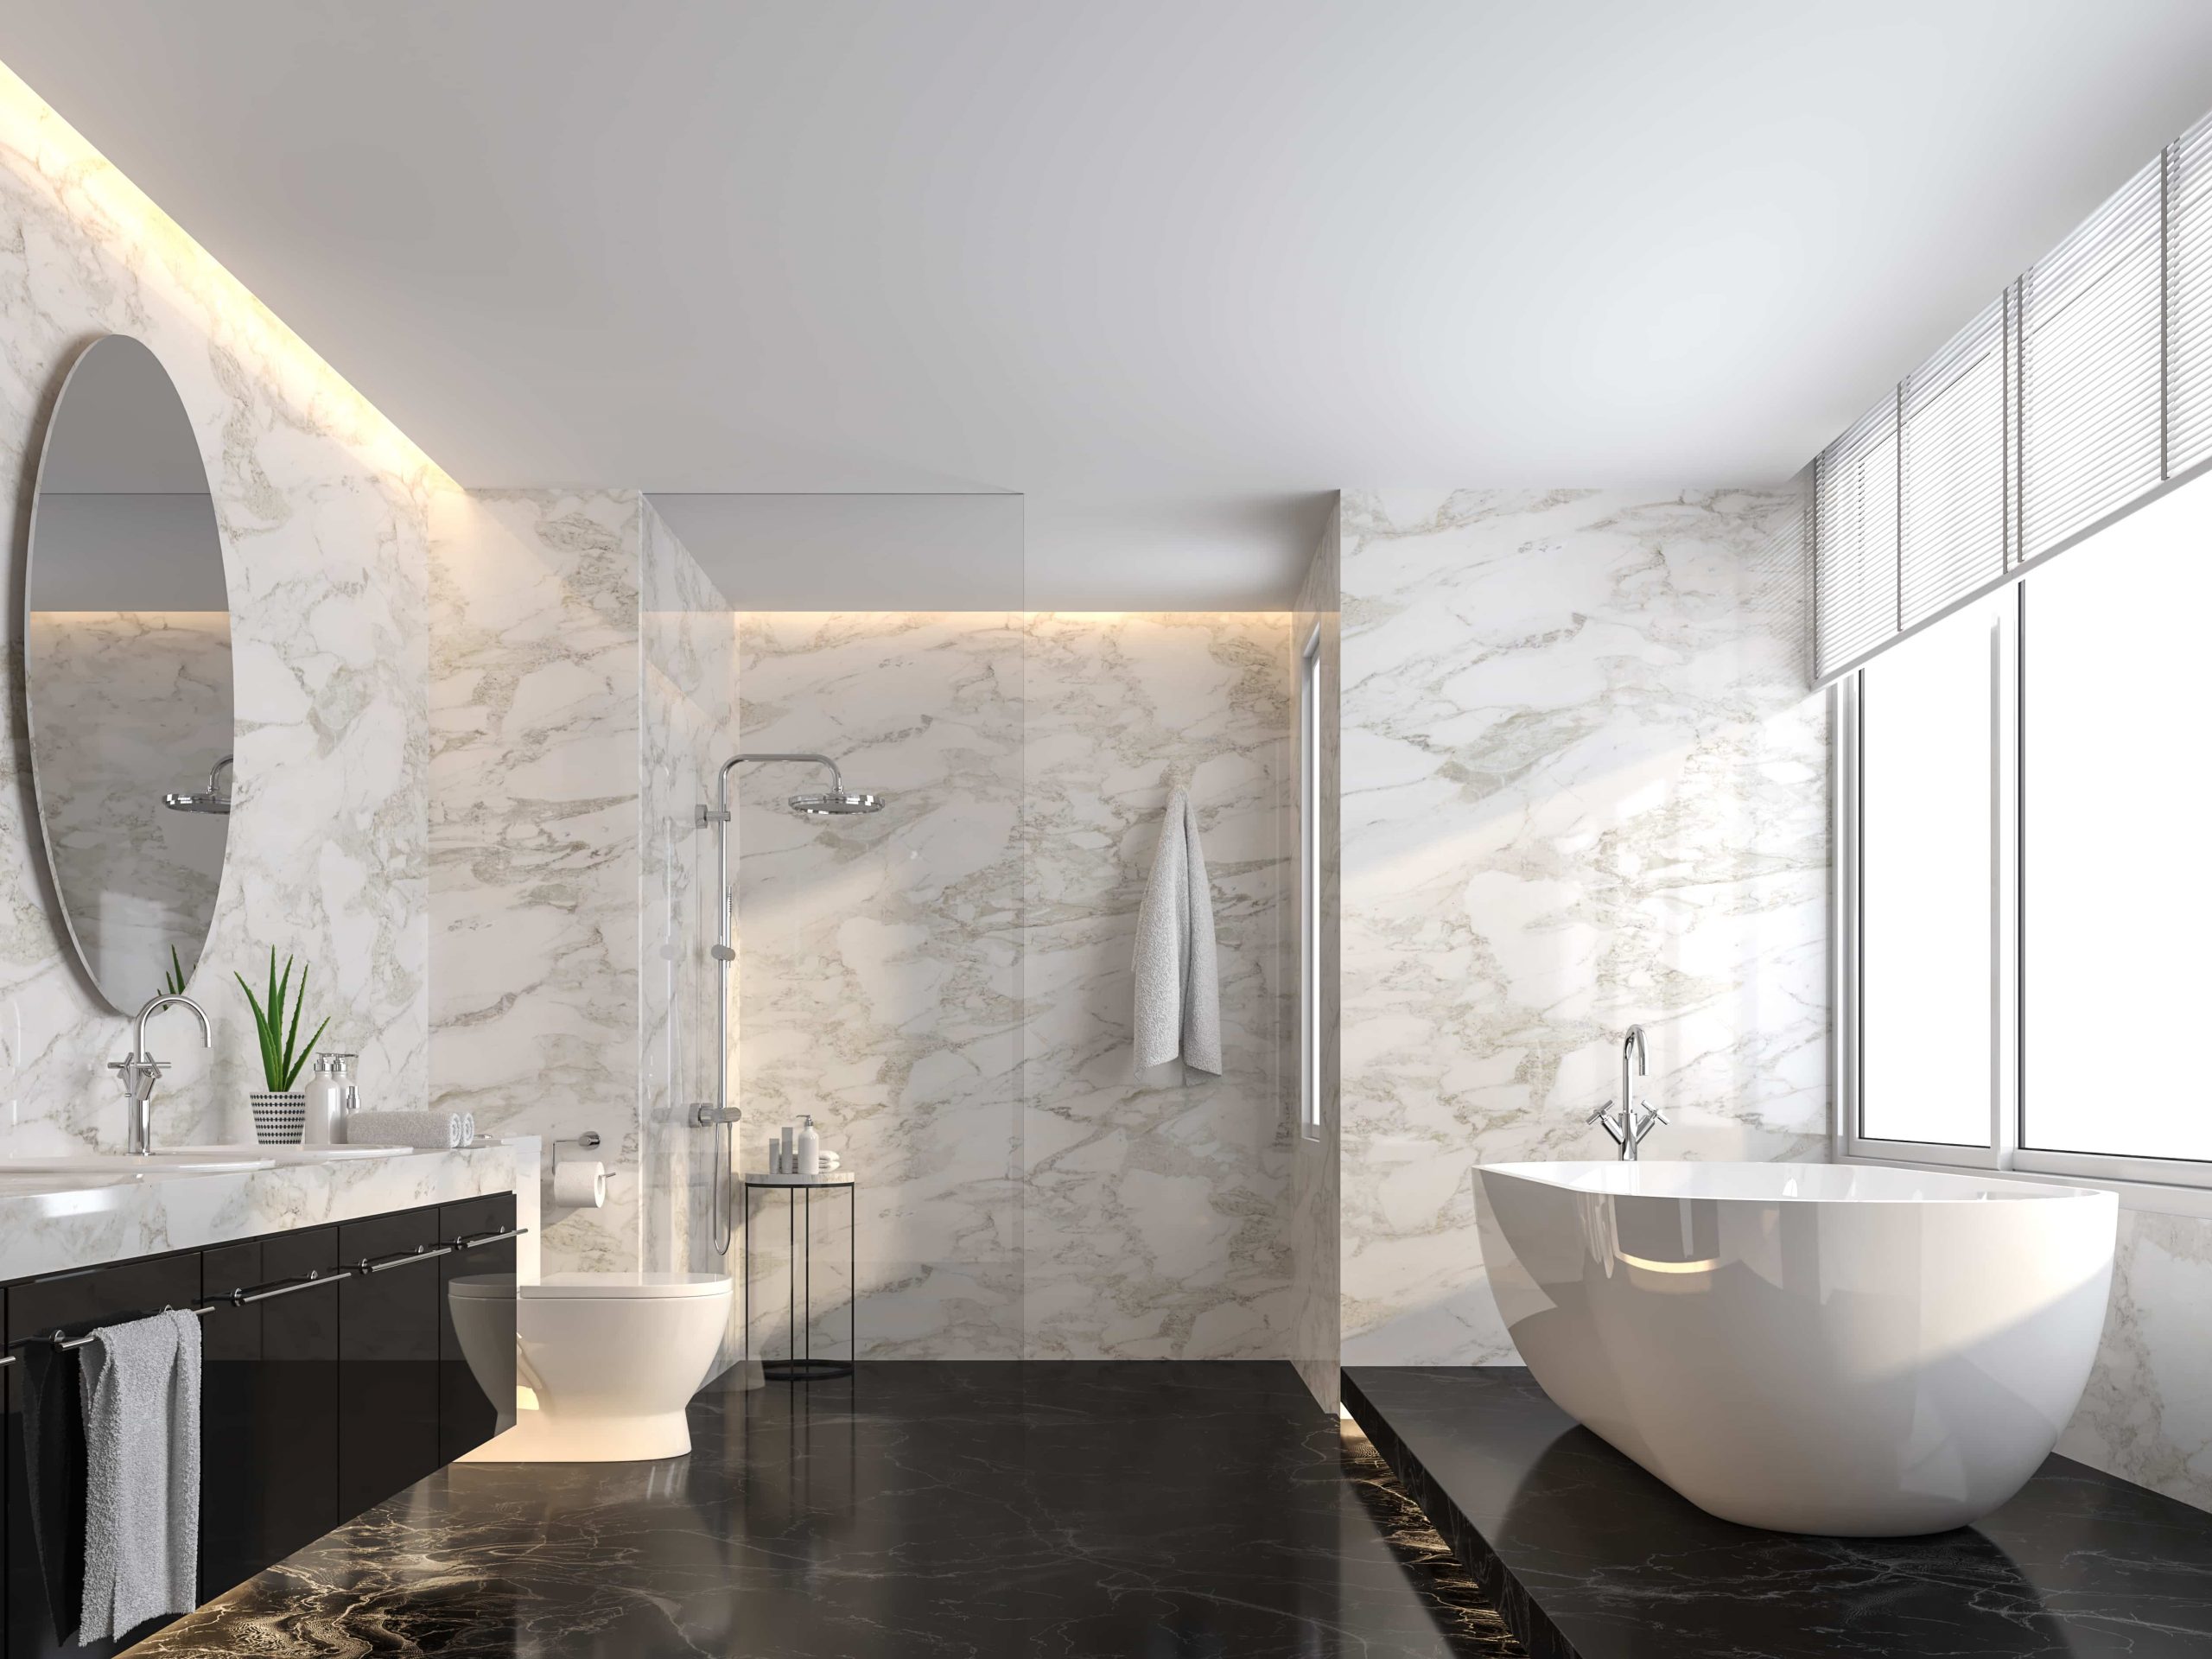  Save Download Preview Luxury bathroom with black marble floor and white marble wall 3d render,The room has a clear glass shower partition,There are large windows natural light shining into the room. With LArch soaking tub.